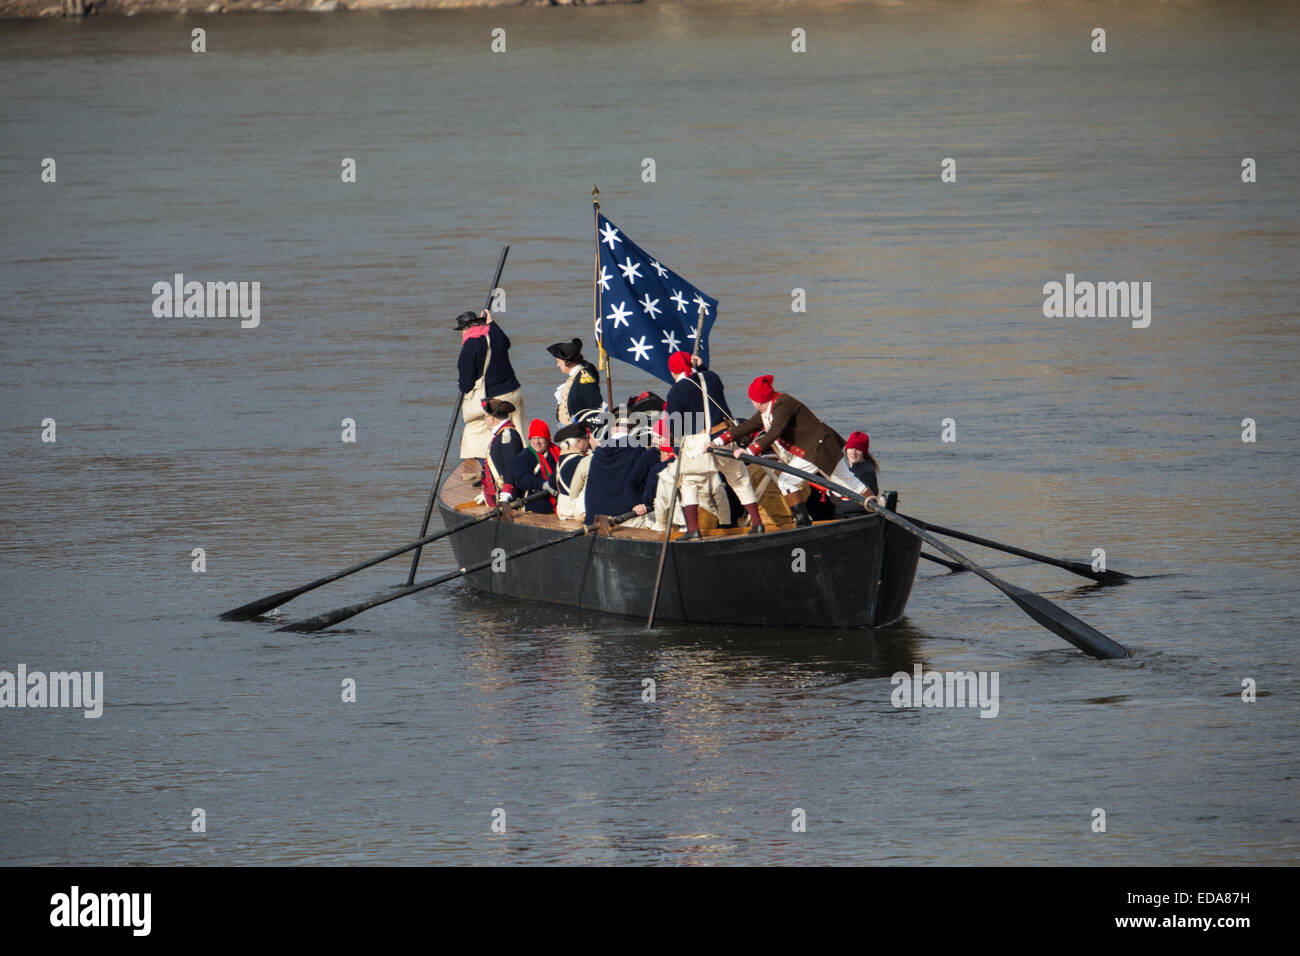 A reenactor portraying General George Washington crosses the Delaware River on Christmas Day. Stock Photo